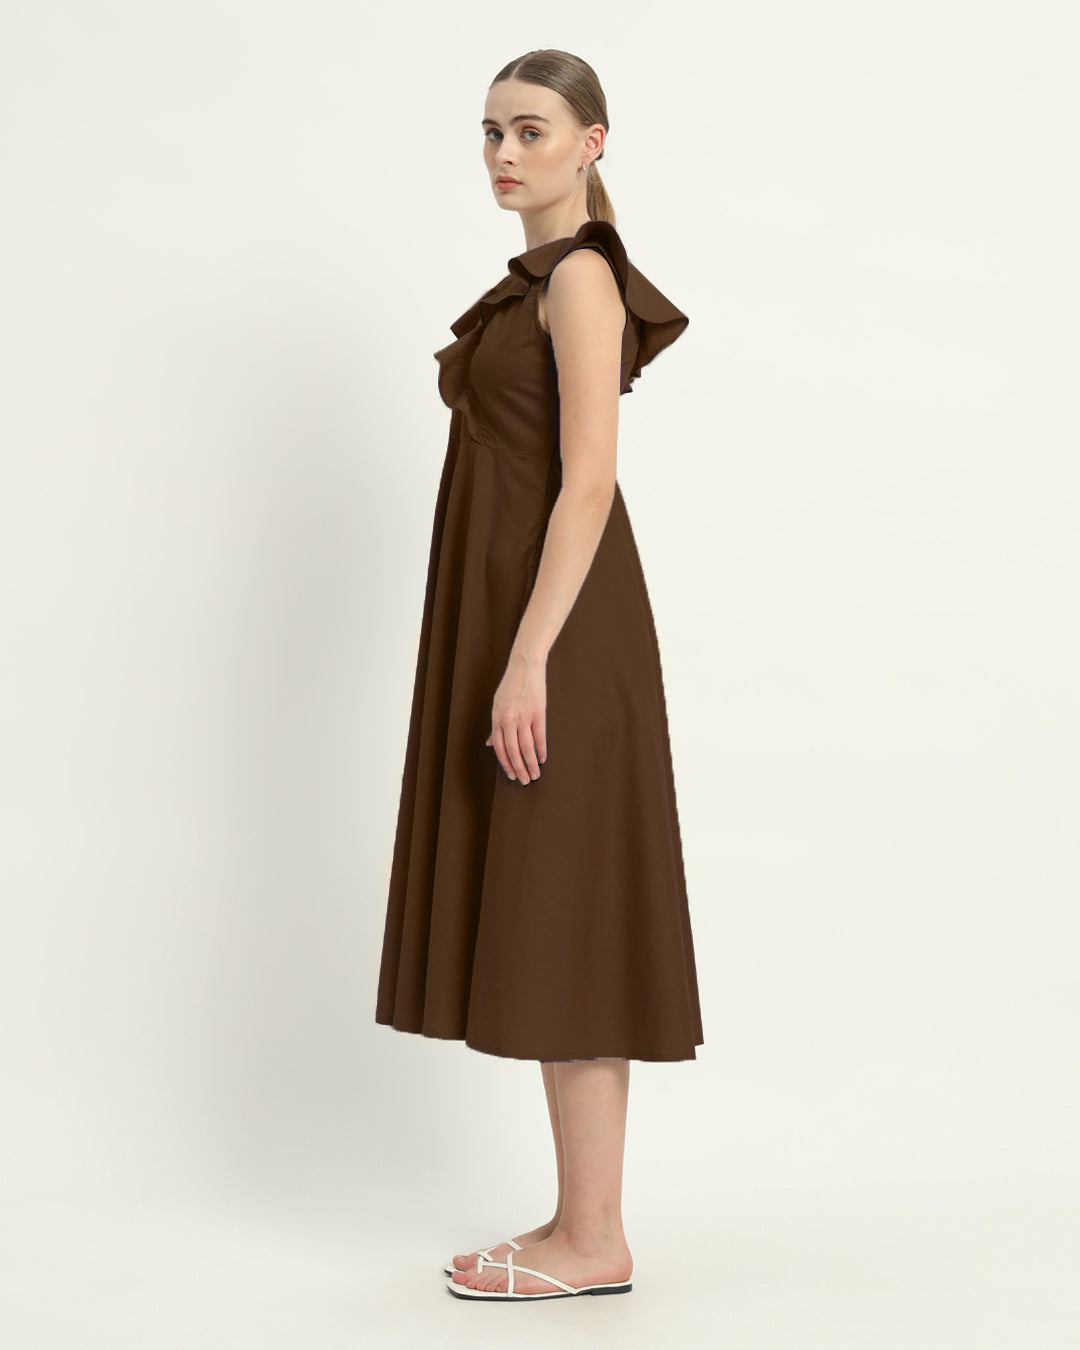 The Albany Nutshell Cotton Dress